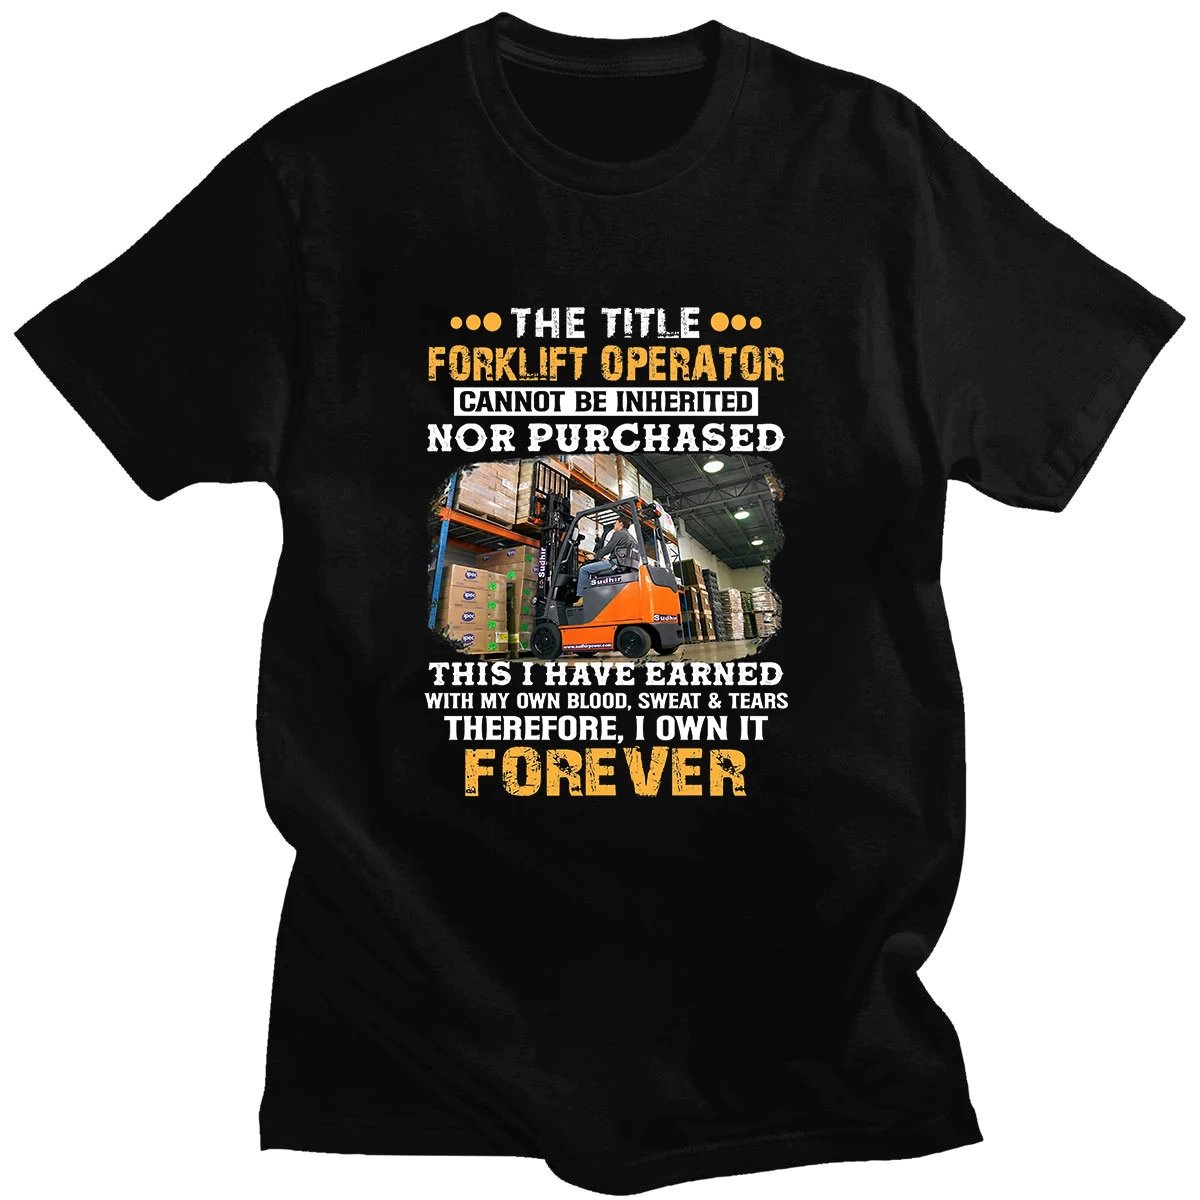 finally some good forklift shirts